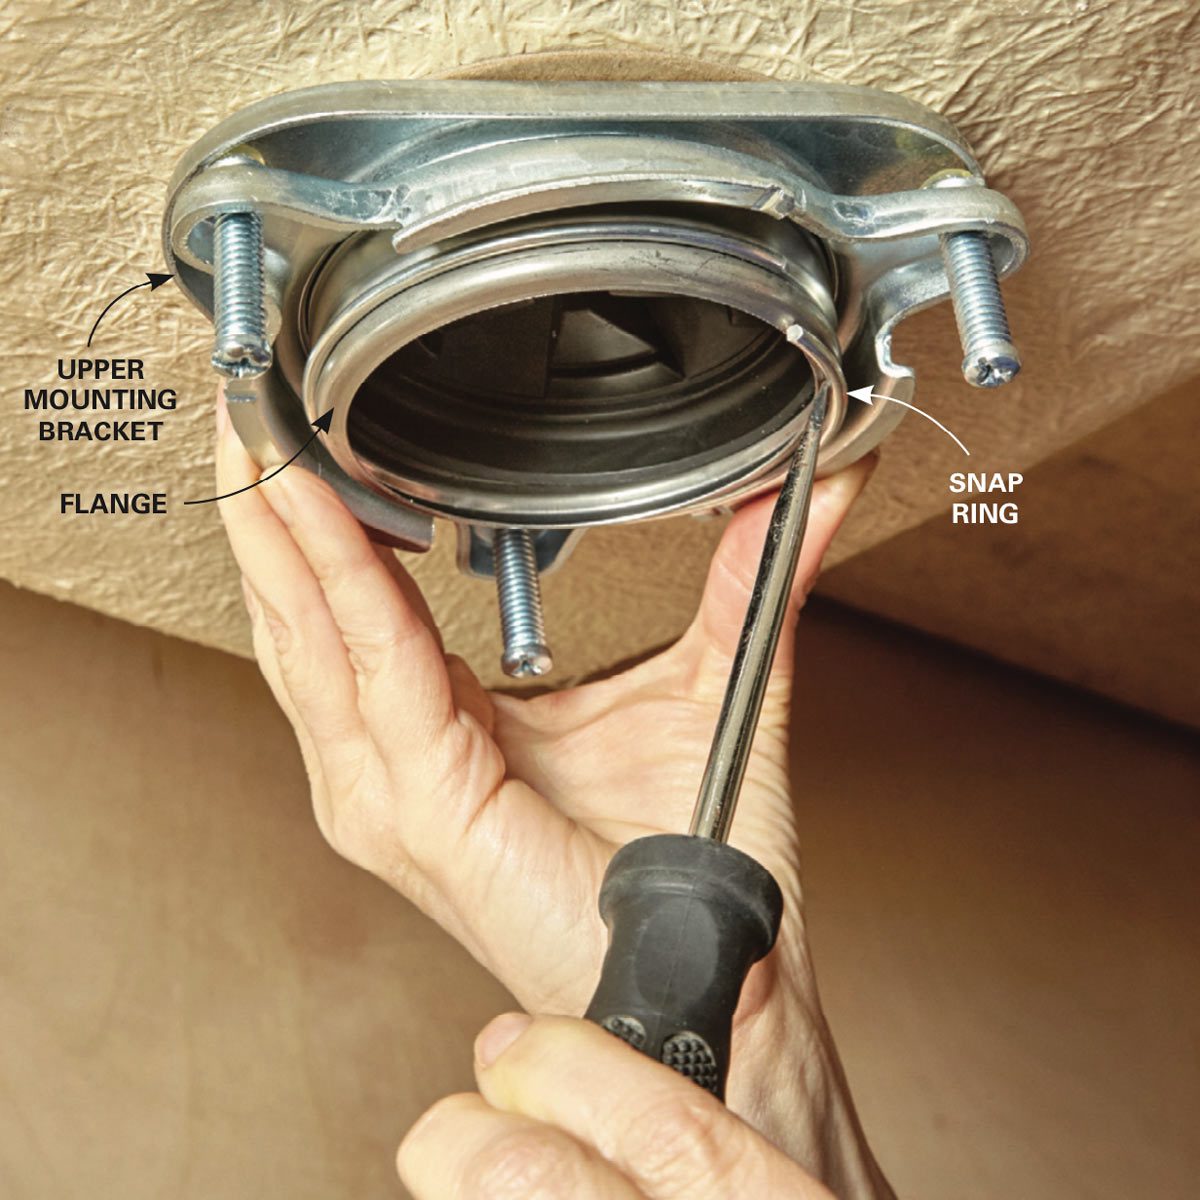 How To Replace A Garbage Disposal Family Handyman